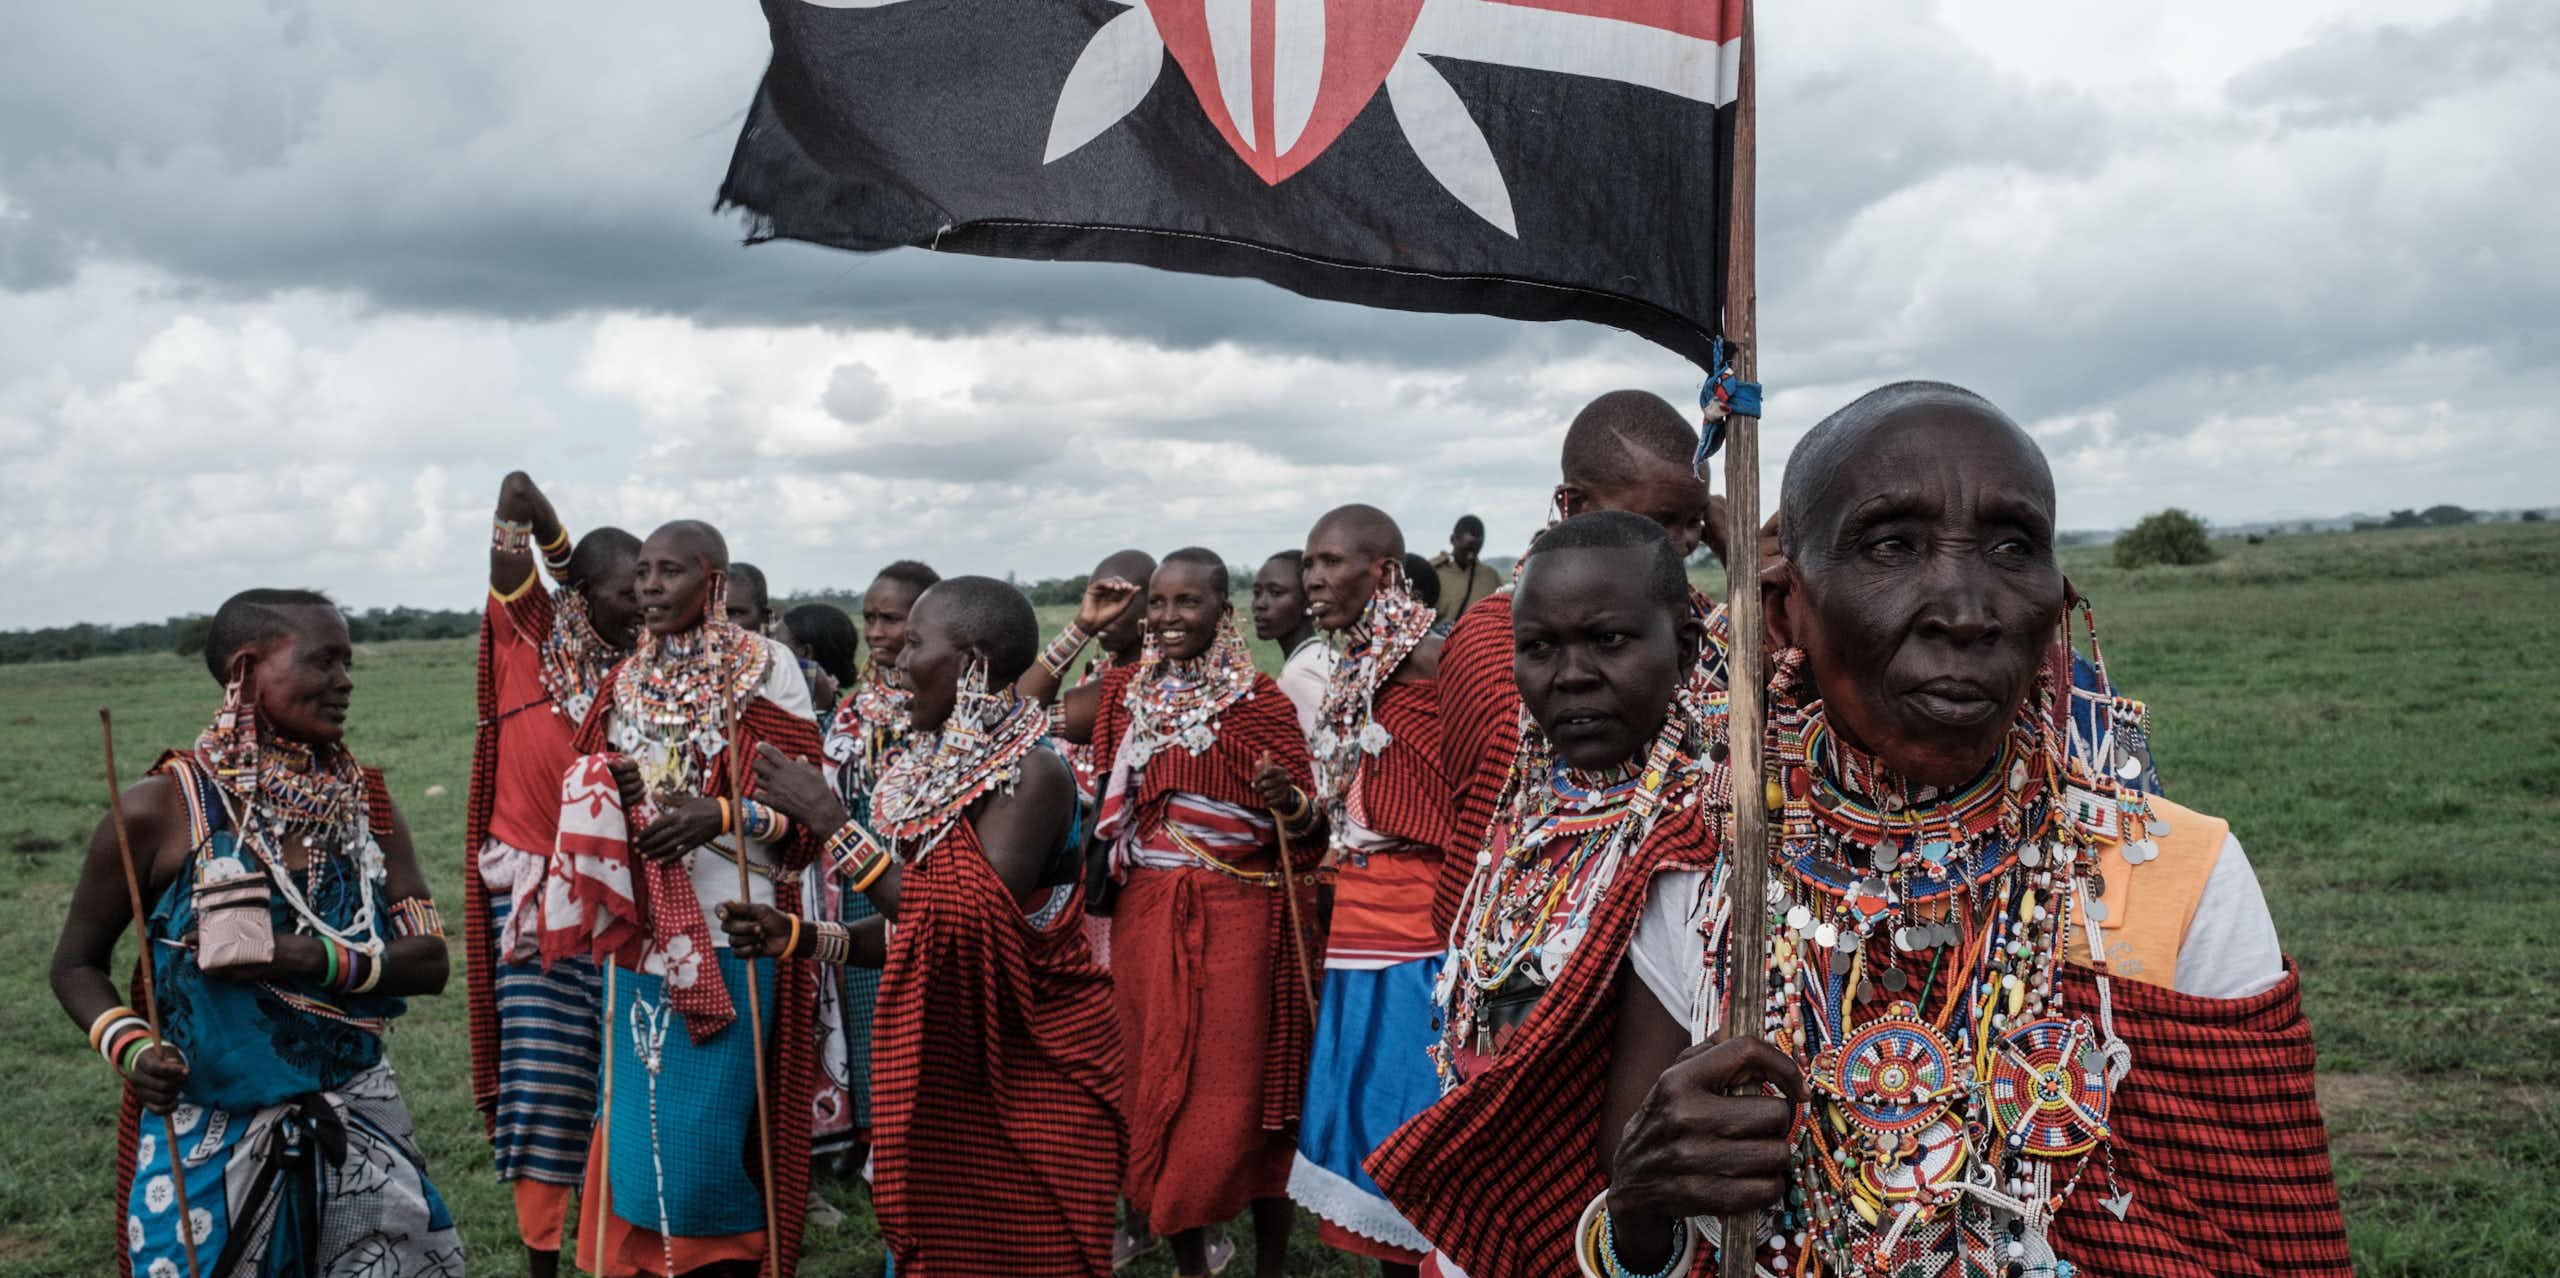 A group of Maasai women, with one holding a Kenyan flag